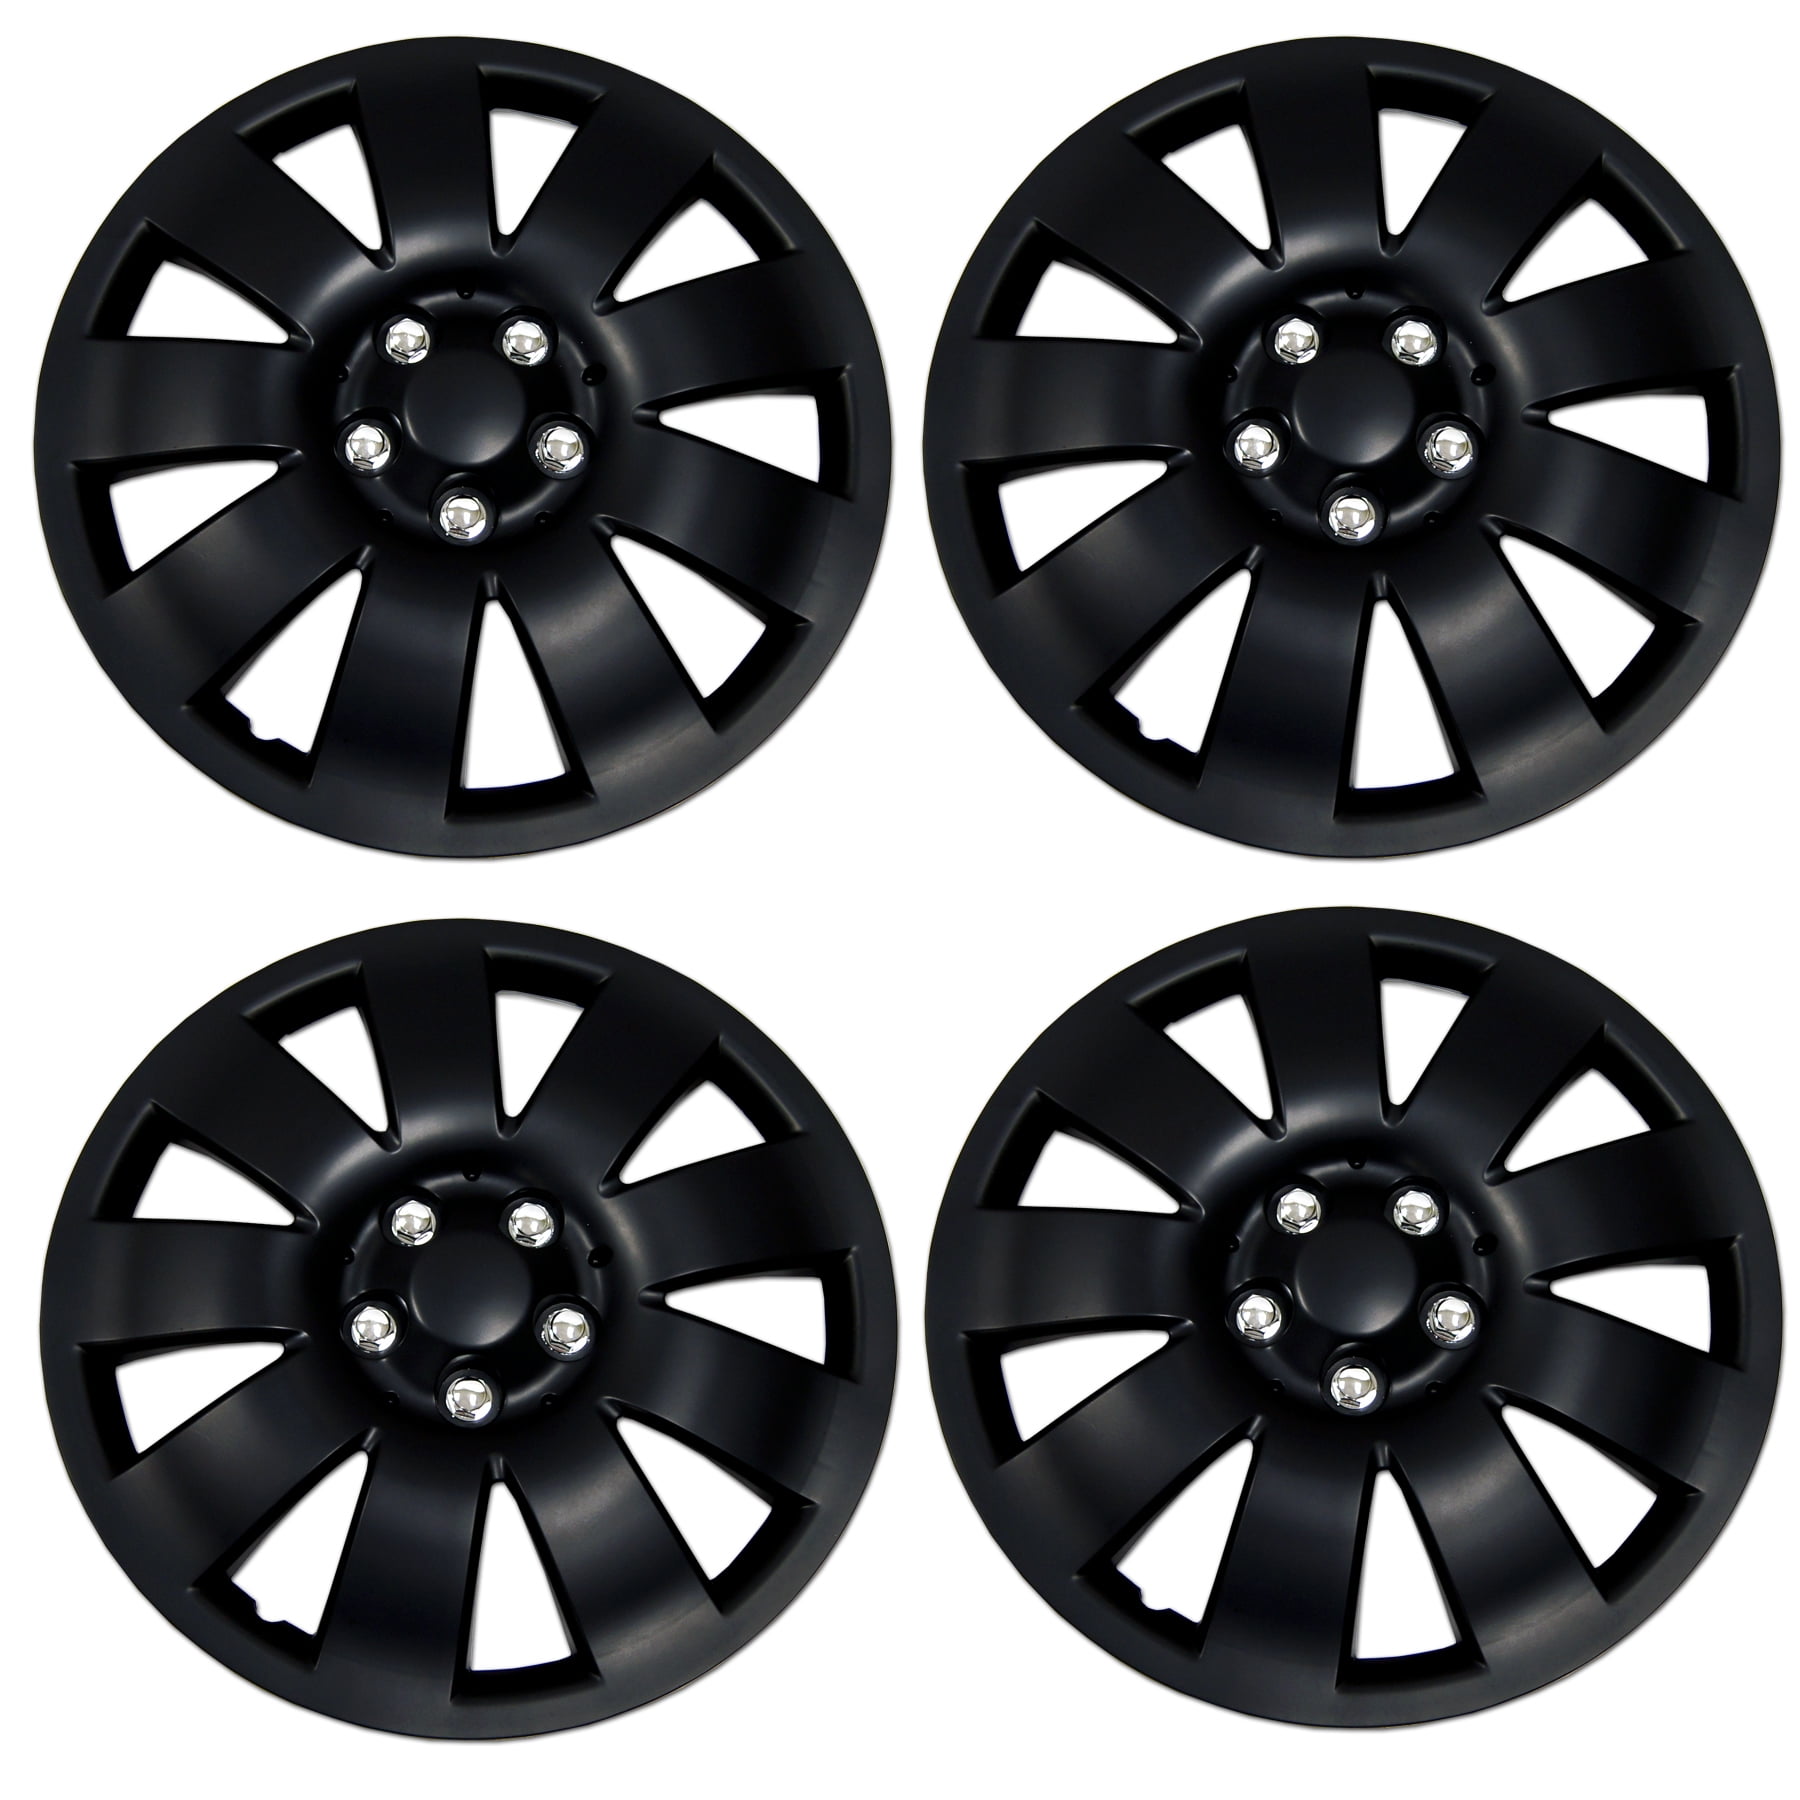 Tuningpros WC3-15-1007-B Pop-On Pack of 4 Hubcaps 15-Inches Style Snap-On Type Matte Black Wheel Covers Hub-caps 